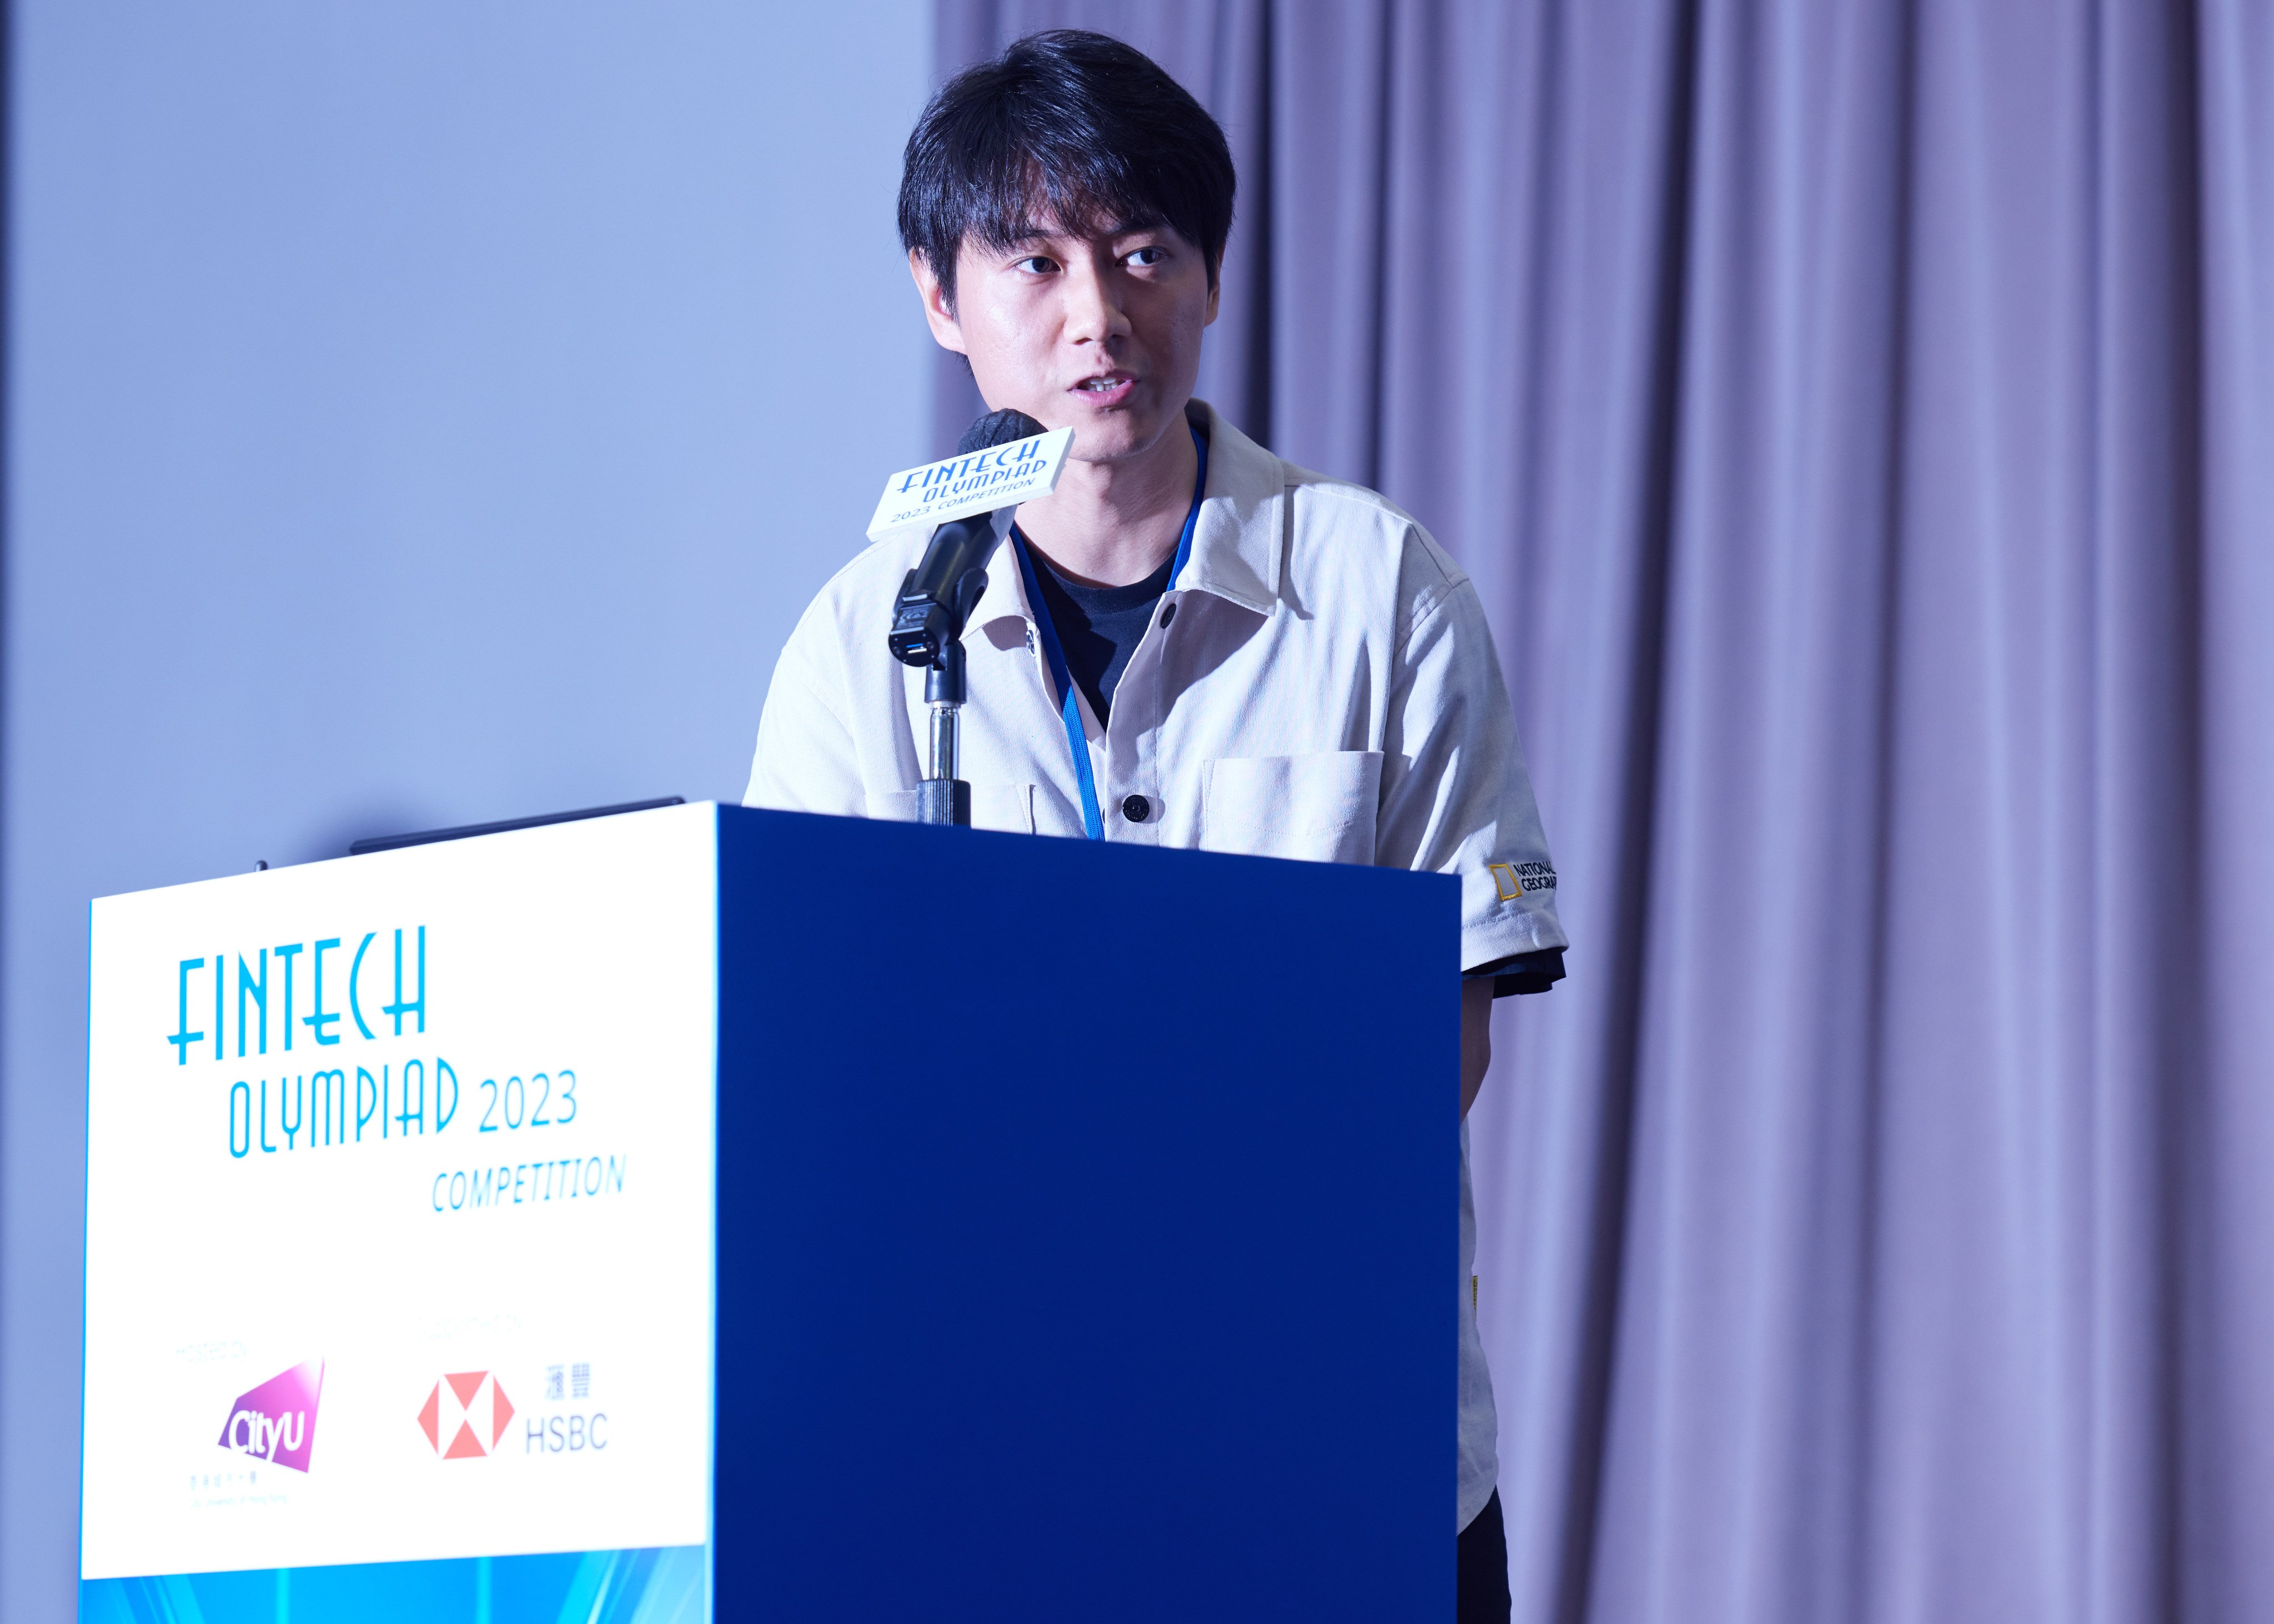 Hong Kong-based PhD student Kyrie Luo won the gold medal at the FinTech Olympiad 2023 competition with his idea for a blockchain-based carbon credit-trading platform aimed at improving transparency in the market. 